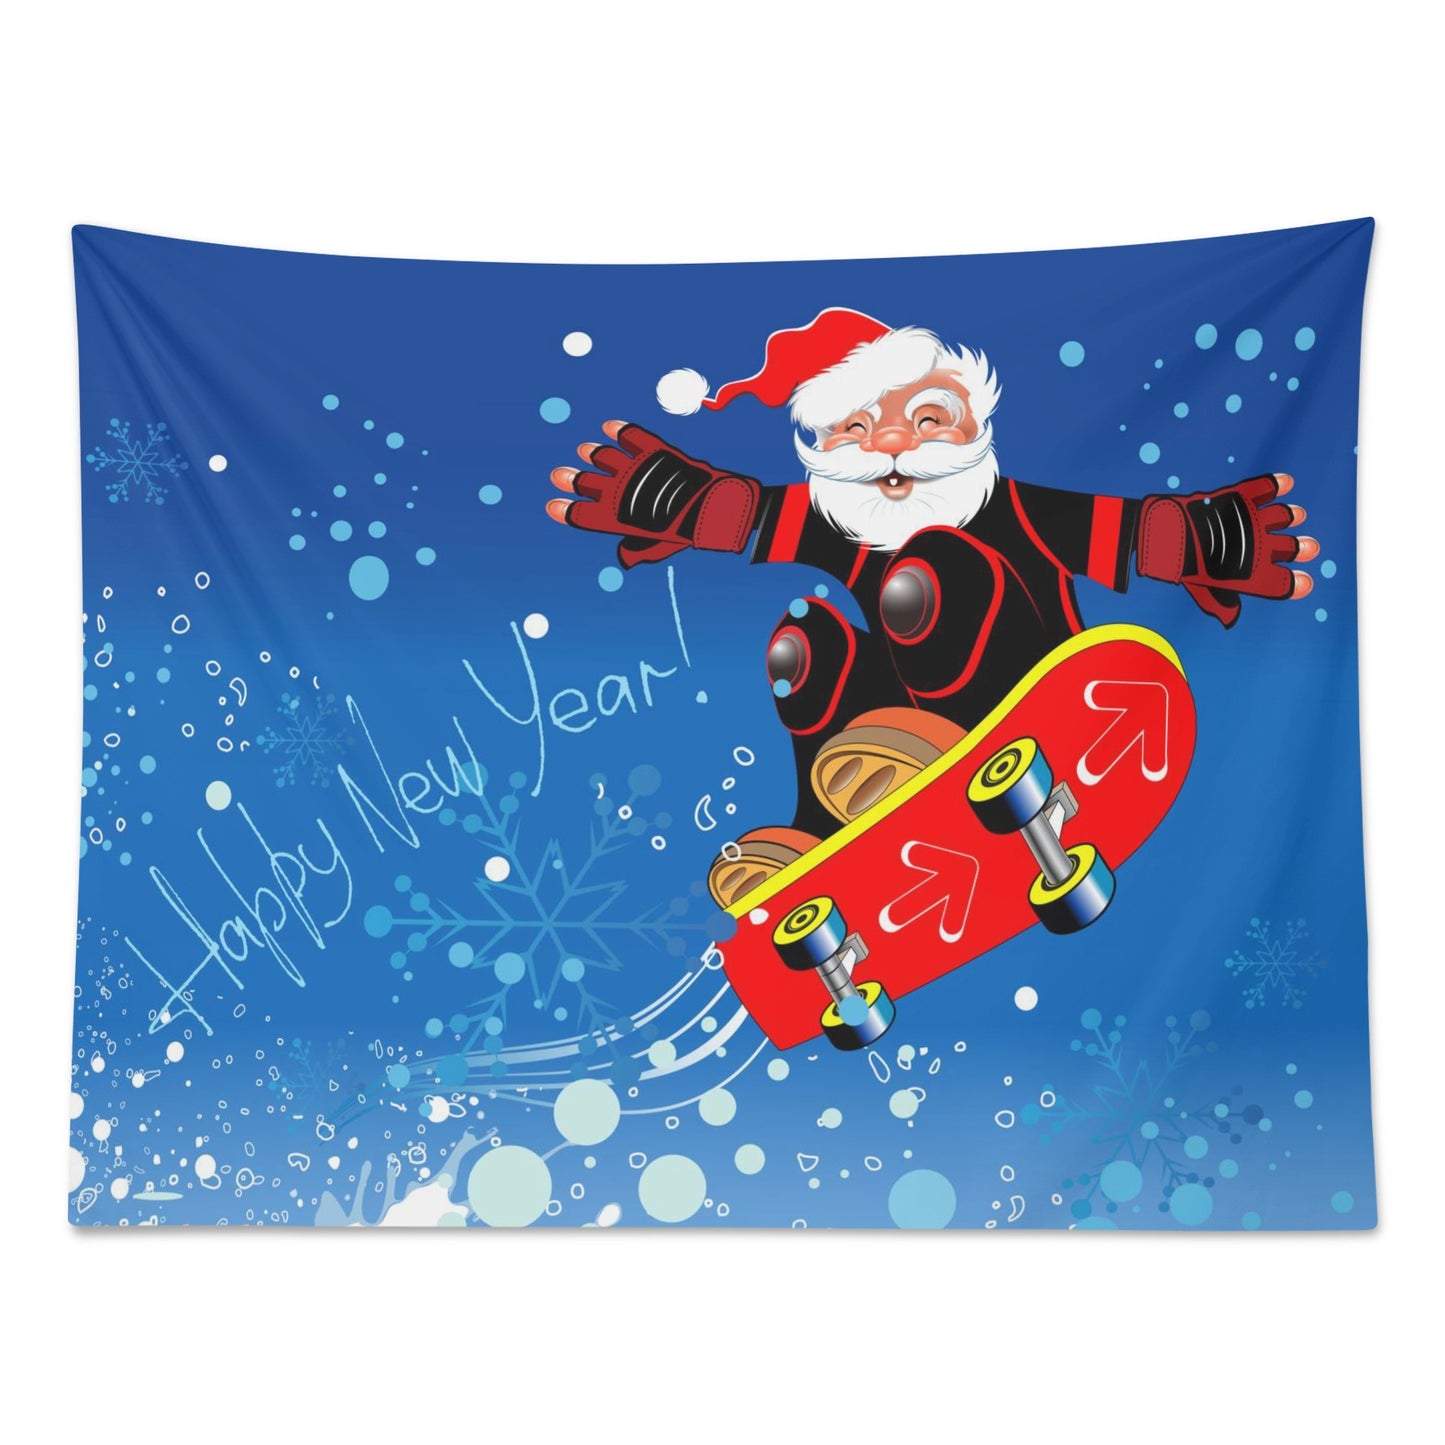 A Skate Boarding Santa for Christmas Polyester Peach Skin Wall Tapestry 6 Sizes